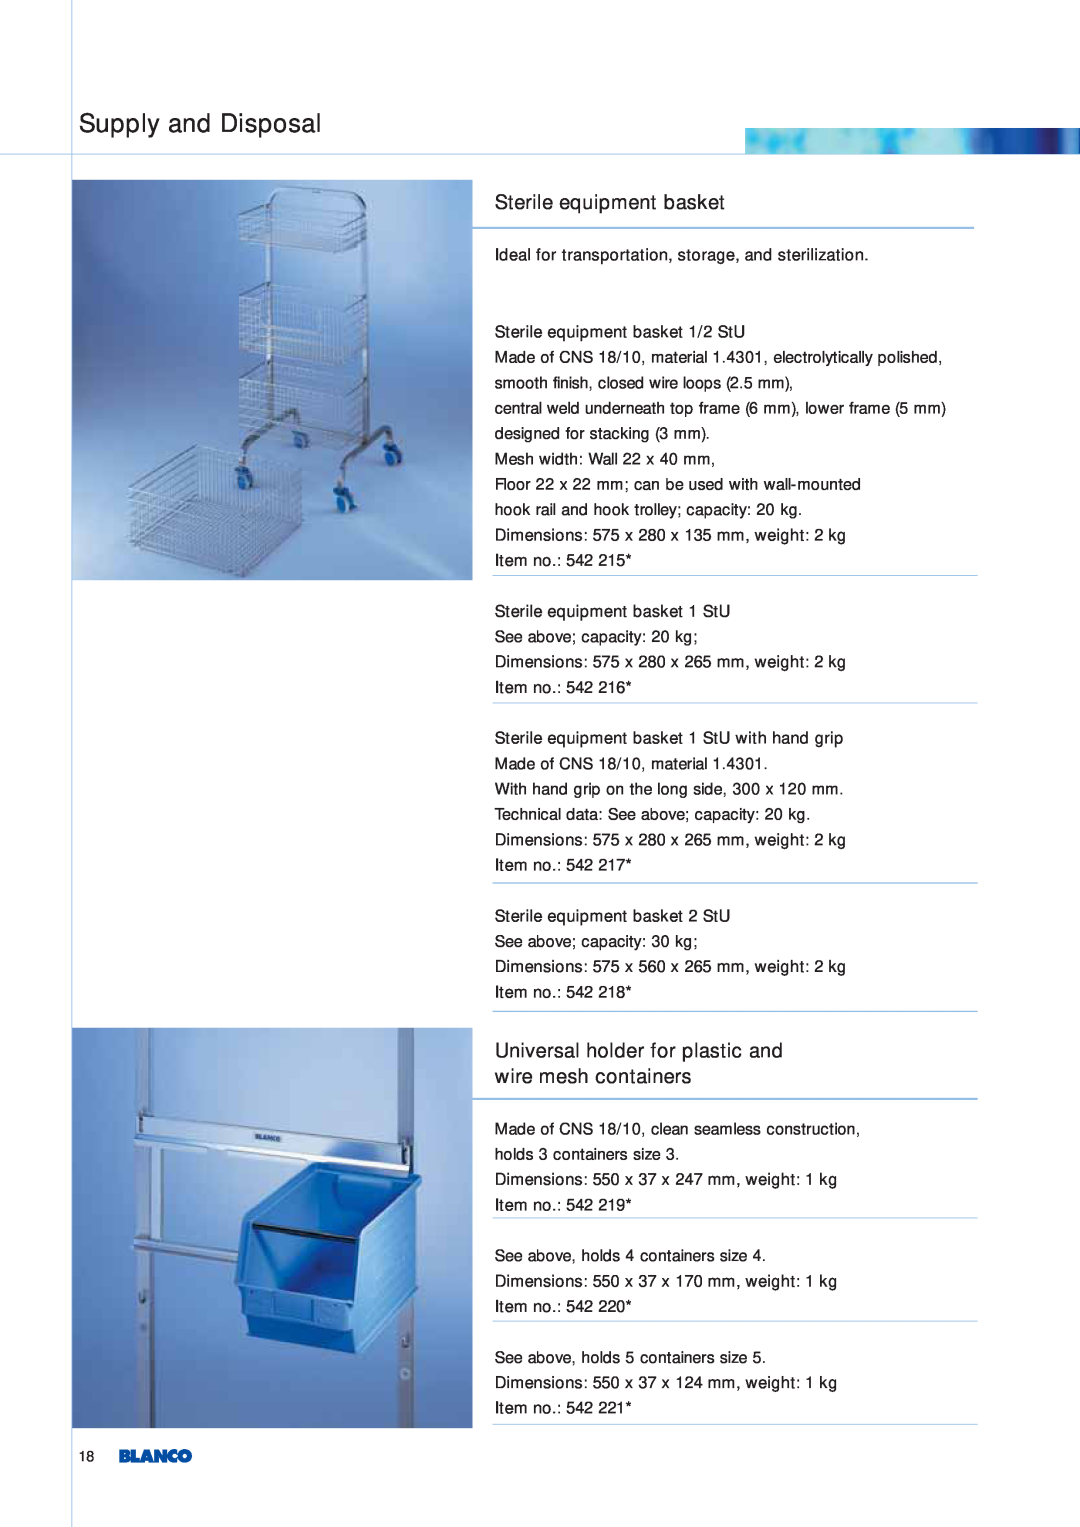 Blanco Tbingen manual Sterile equipment basket, Supply and Disposal 